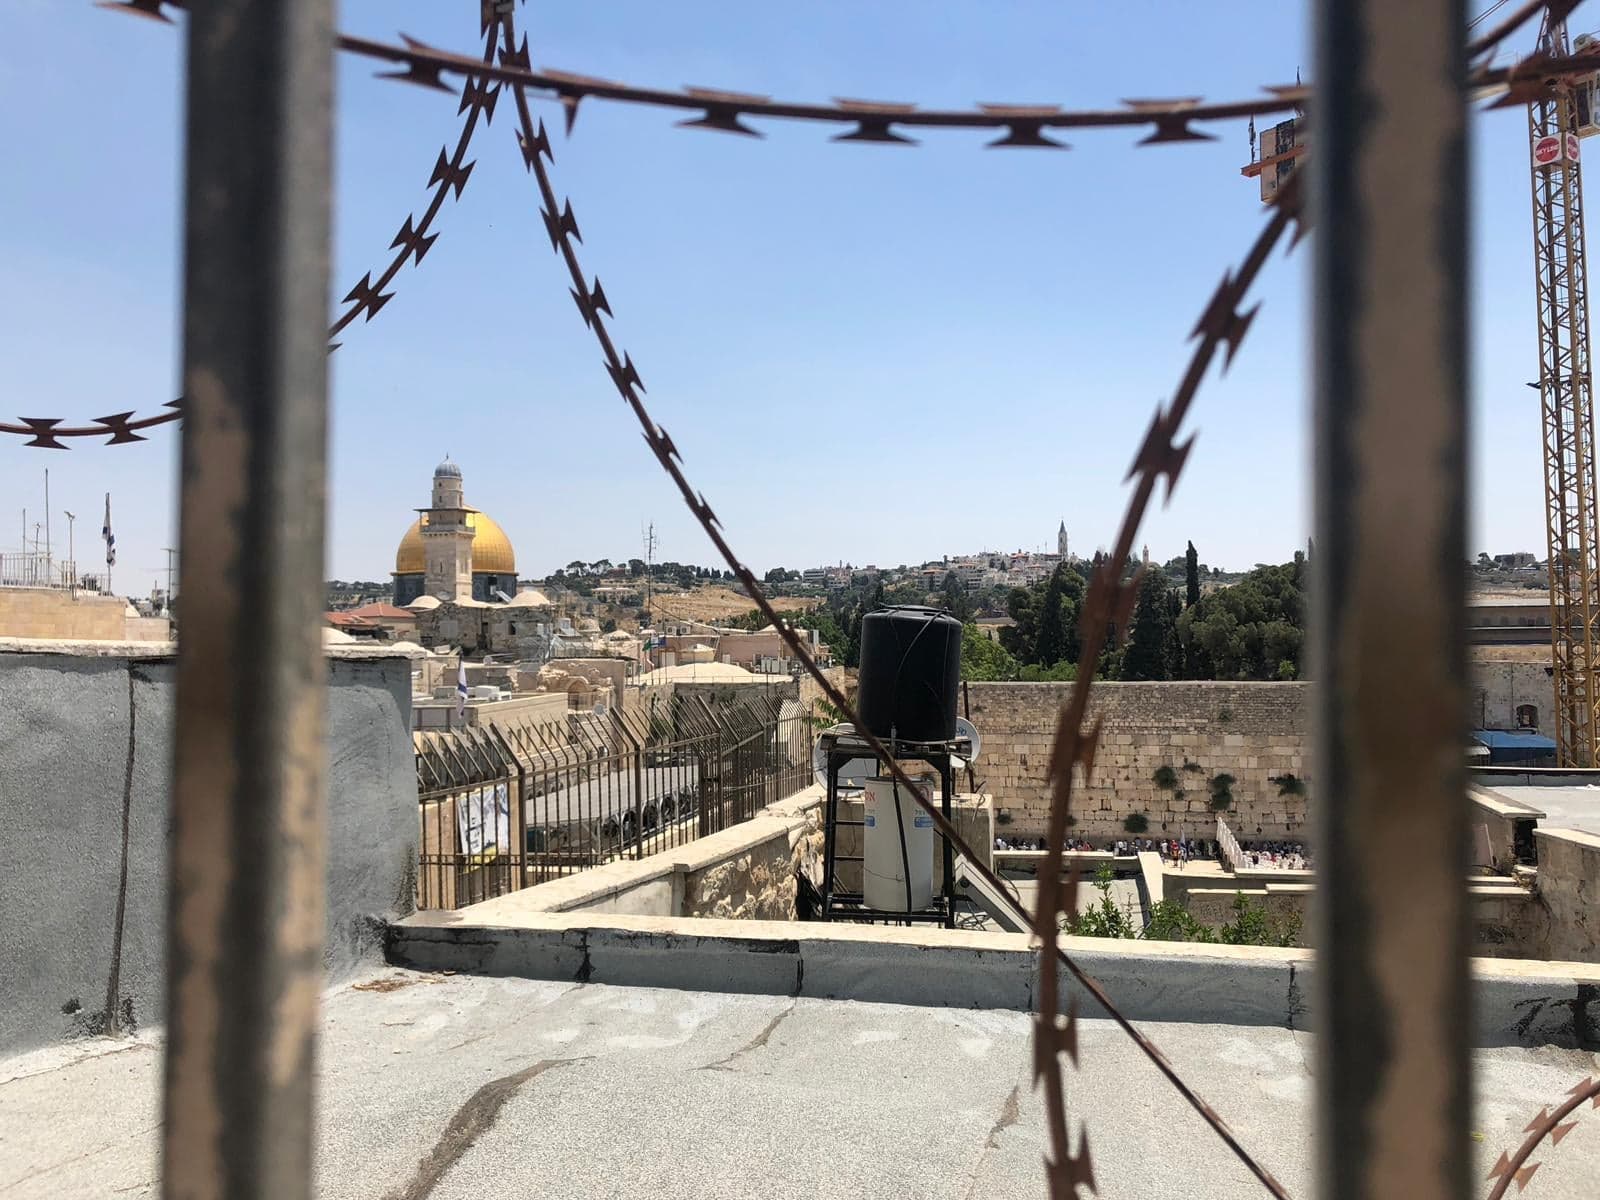 A view from a window with wire across it of Occupied East Jerusalem, overlooking the Dome of the Rock in Al-Aqsa.